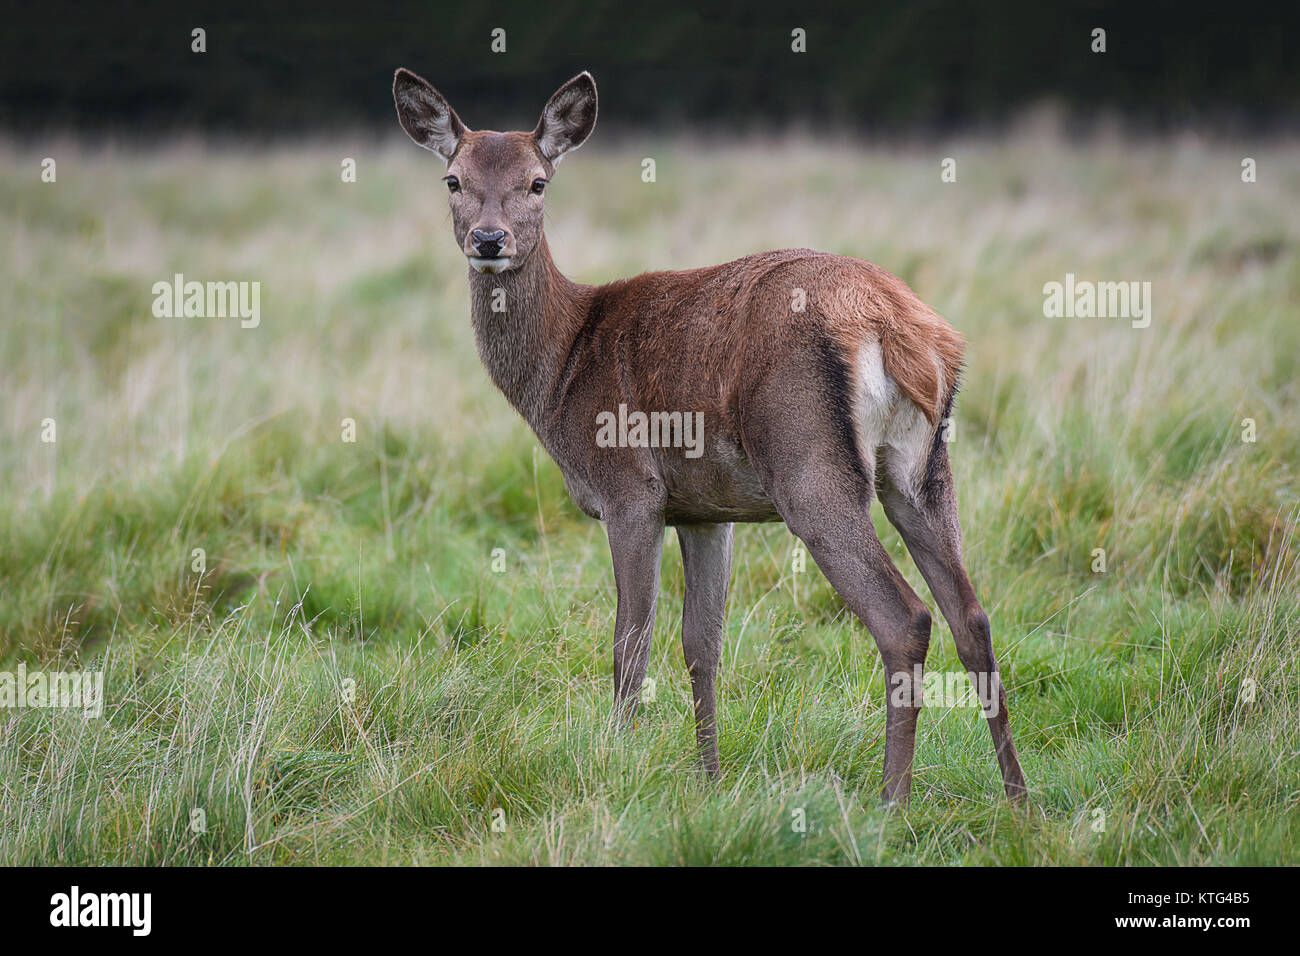 A young red deer fawn standing in grass turning slightly back and looking directly forward at the camera viewer Stock Photo